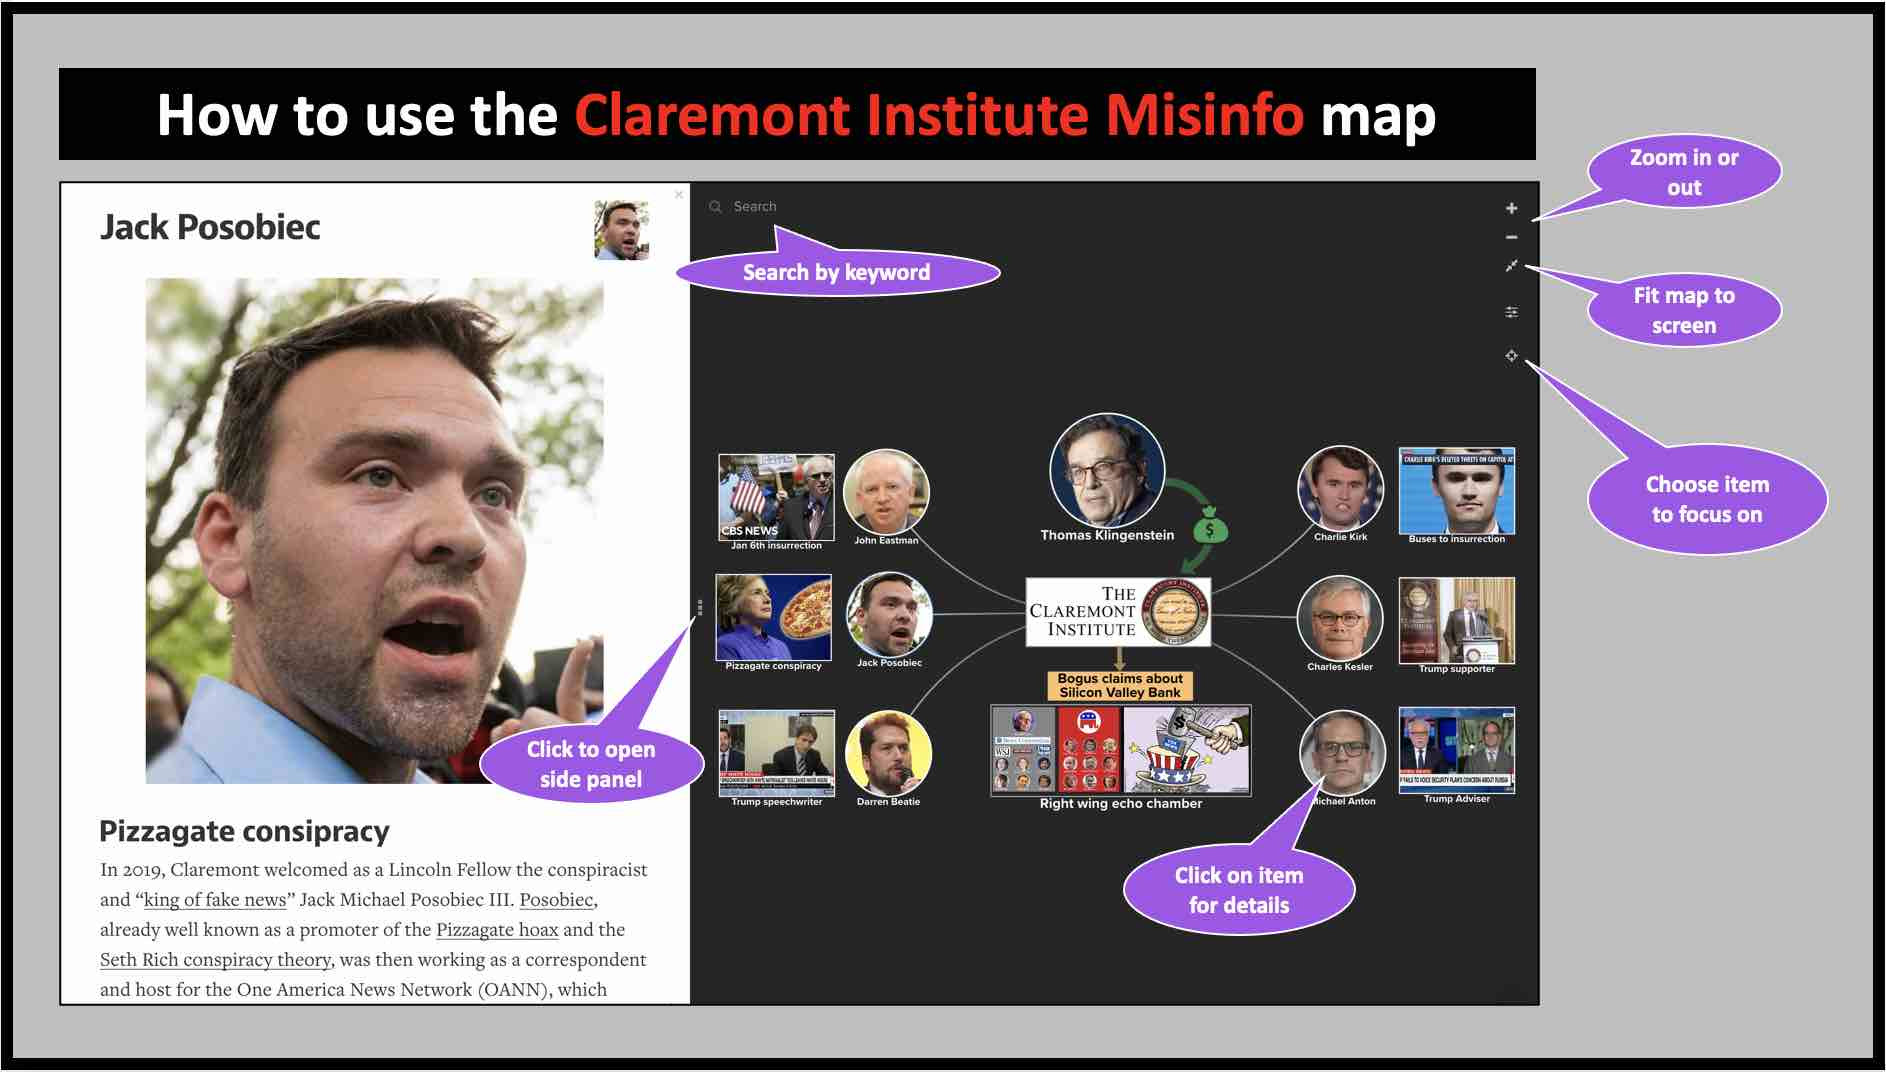 How to use the Claremont Institute Misinfo map